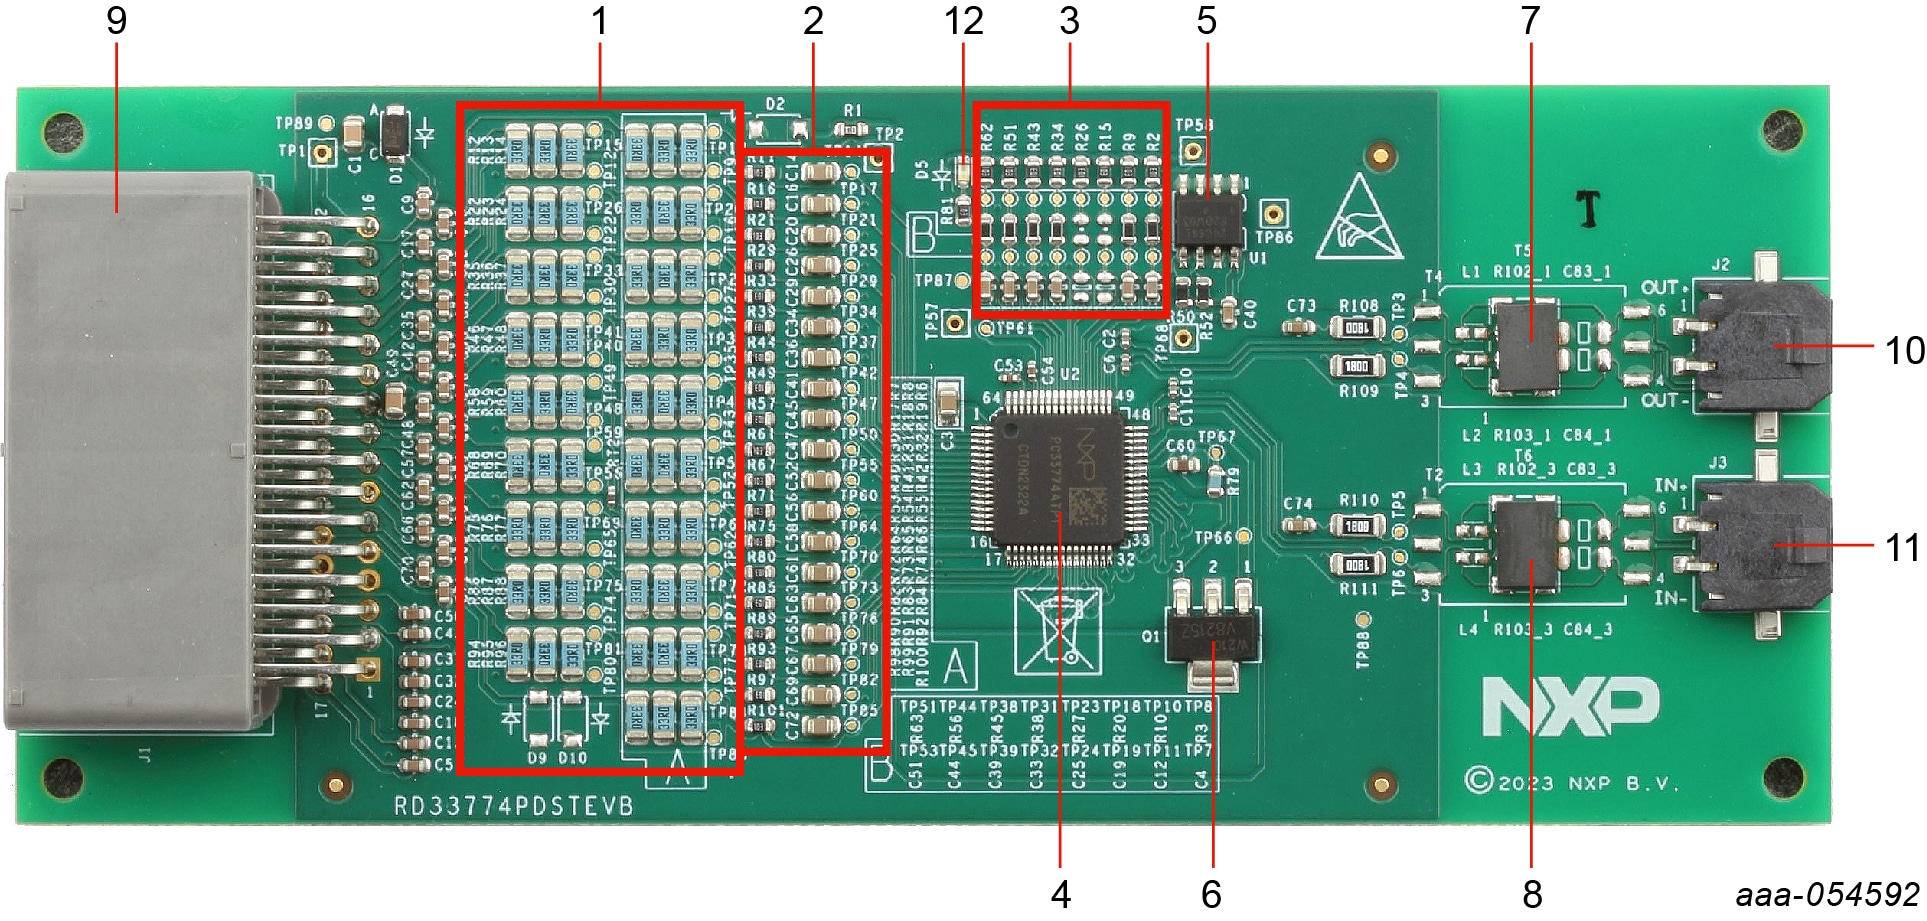 Overview of the RD33774PDSTEVB board